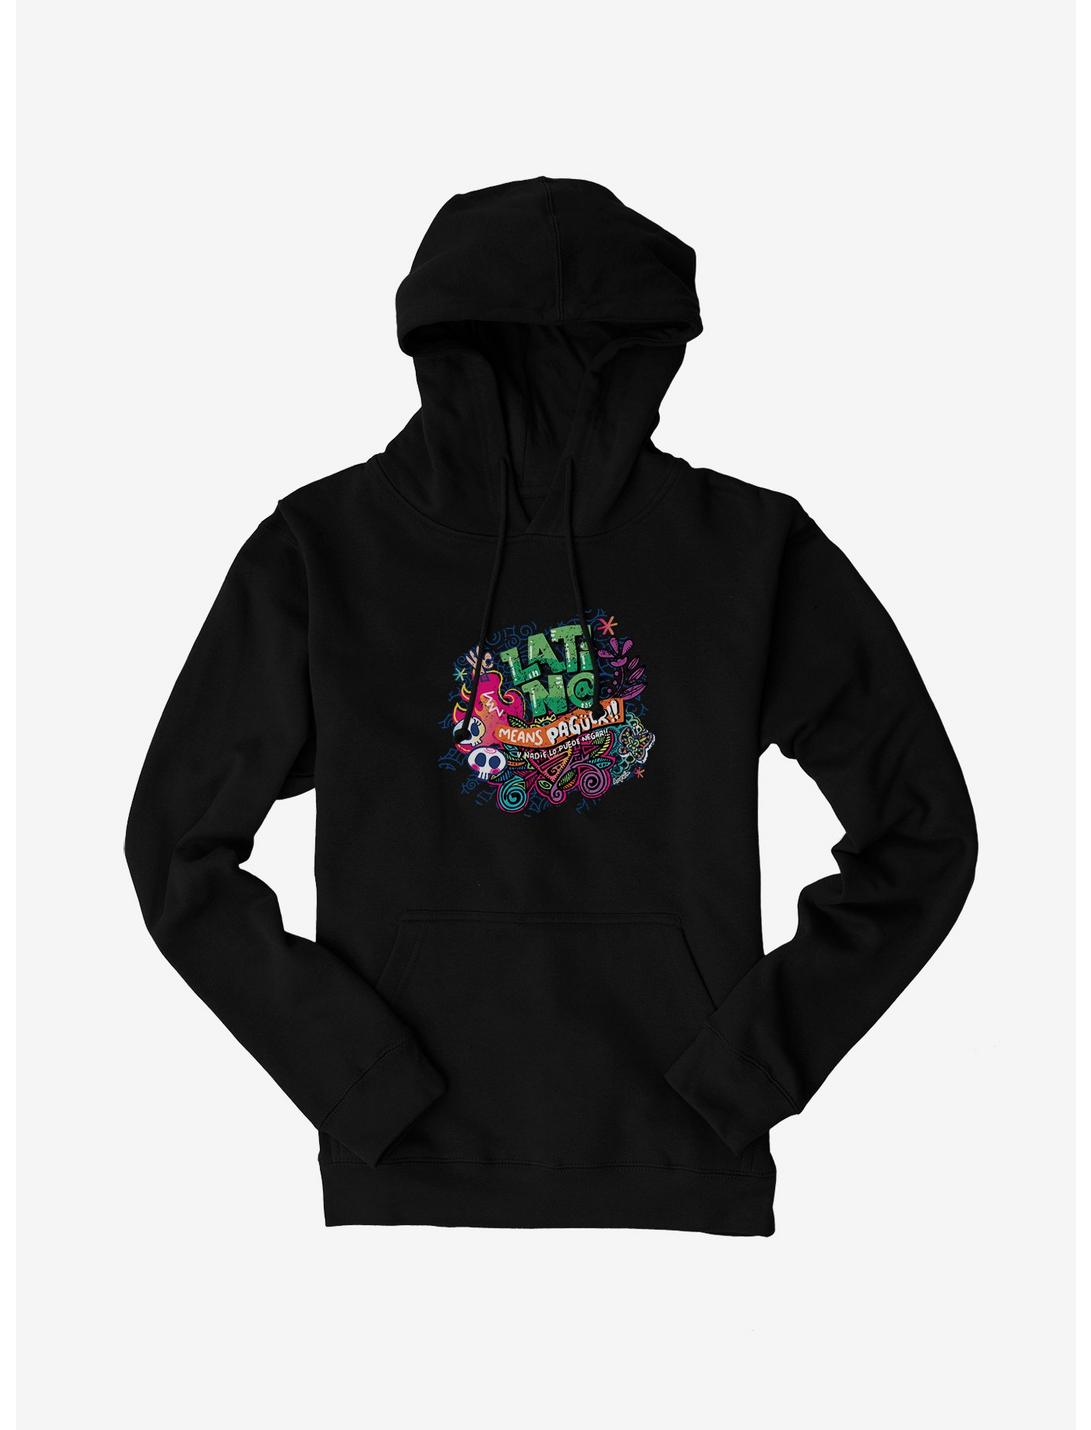 Amparin Latin@ Means Power Hoodie, , hi-res